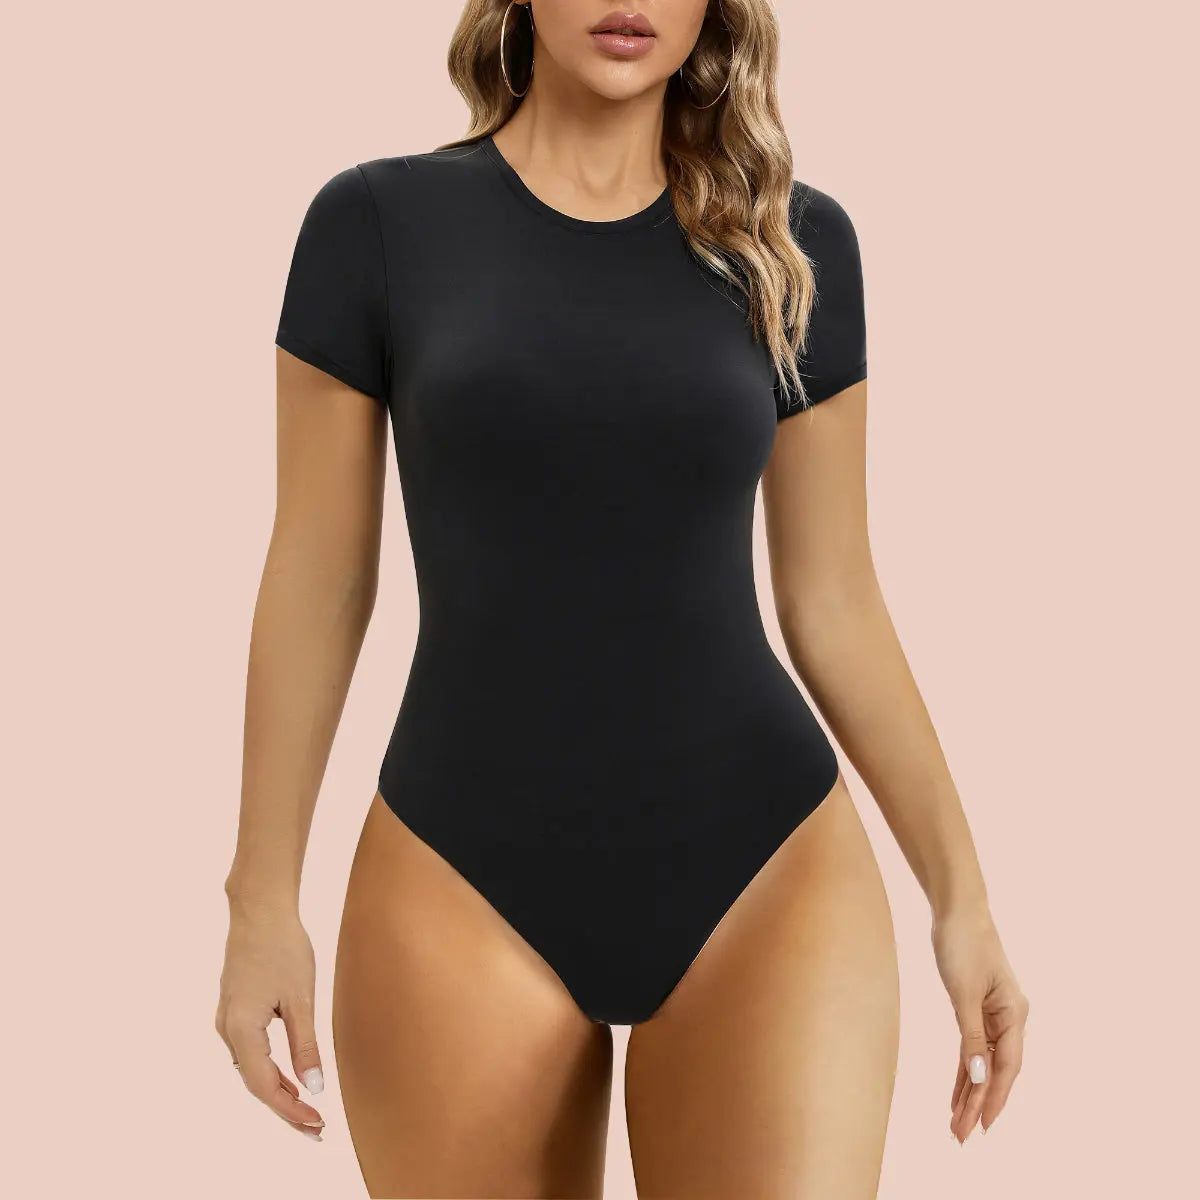 SHAPERX Women's Square Neck Bodysuit Fit Everybody No Compression